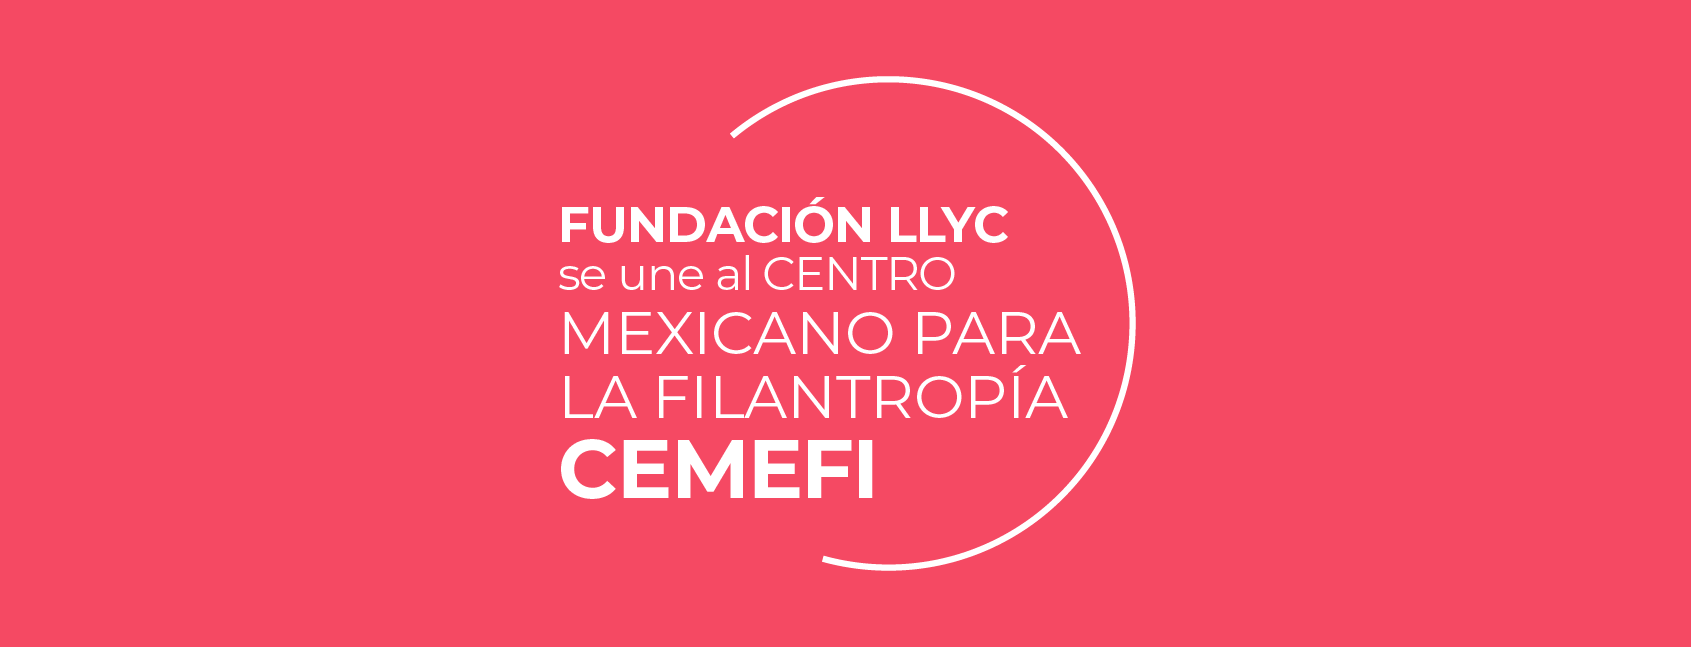 Fundación LLYC partners with CEMEFI to advance social responsibility and philanthropy in Mexico